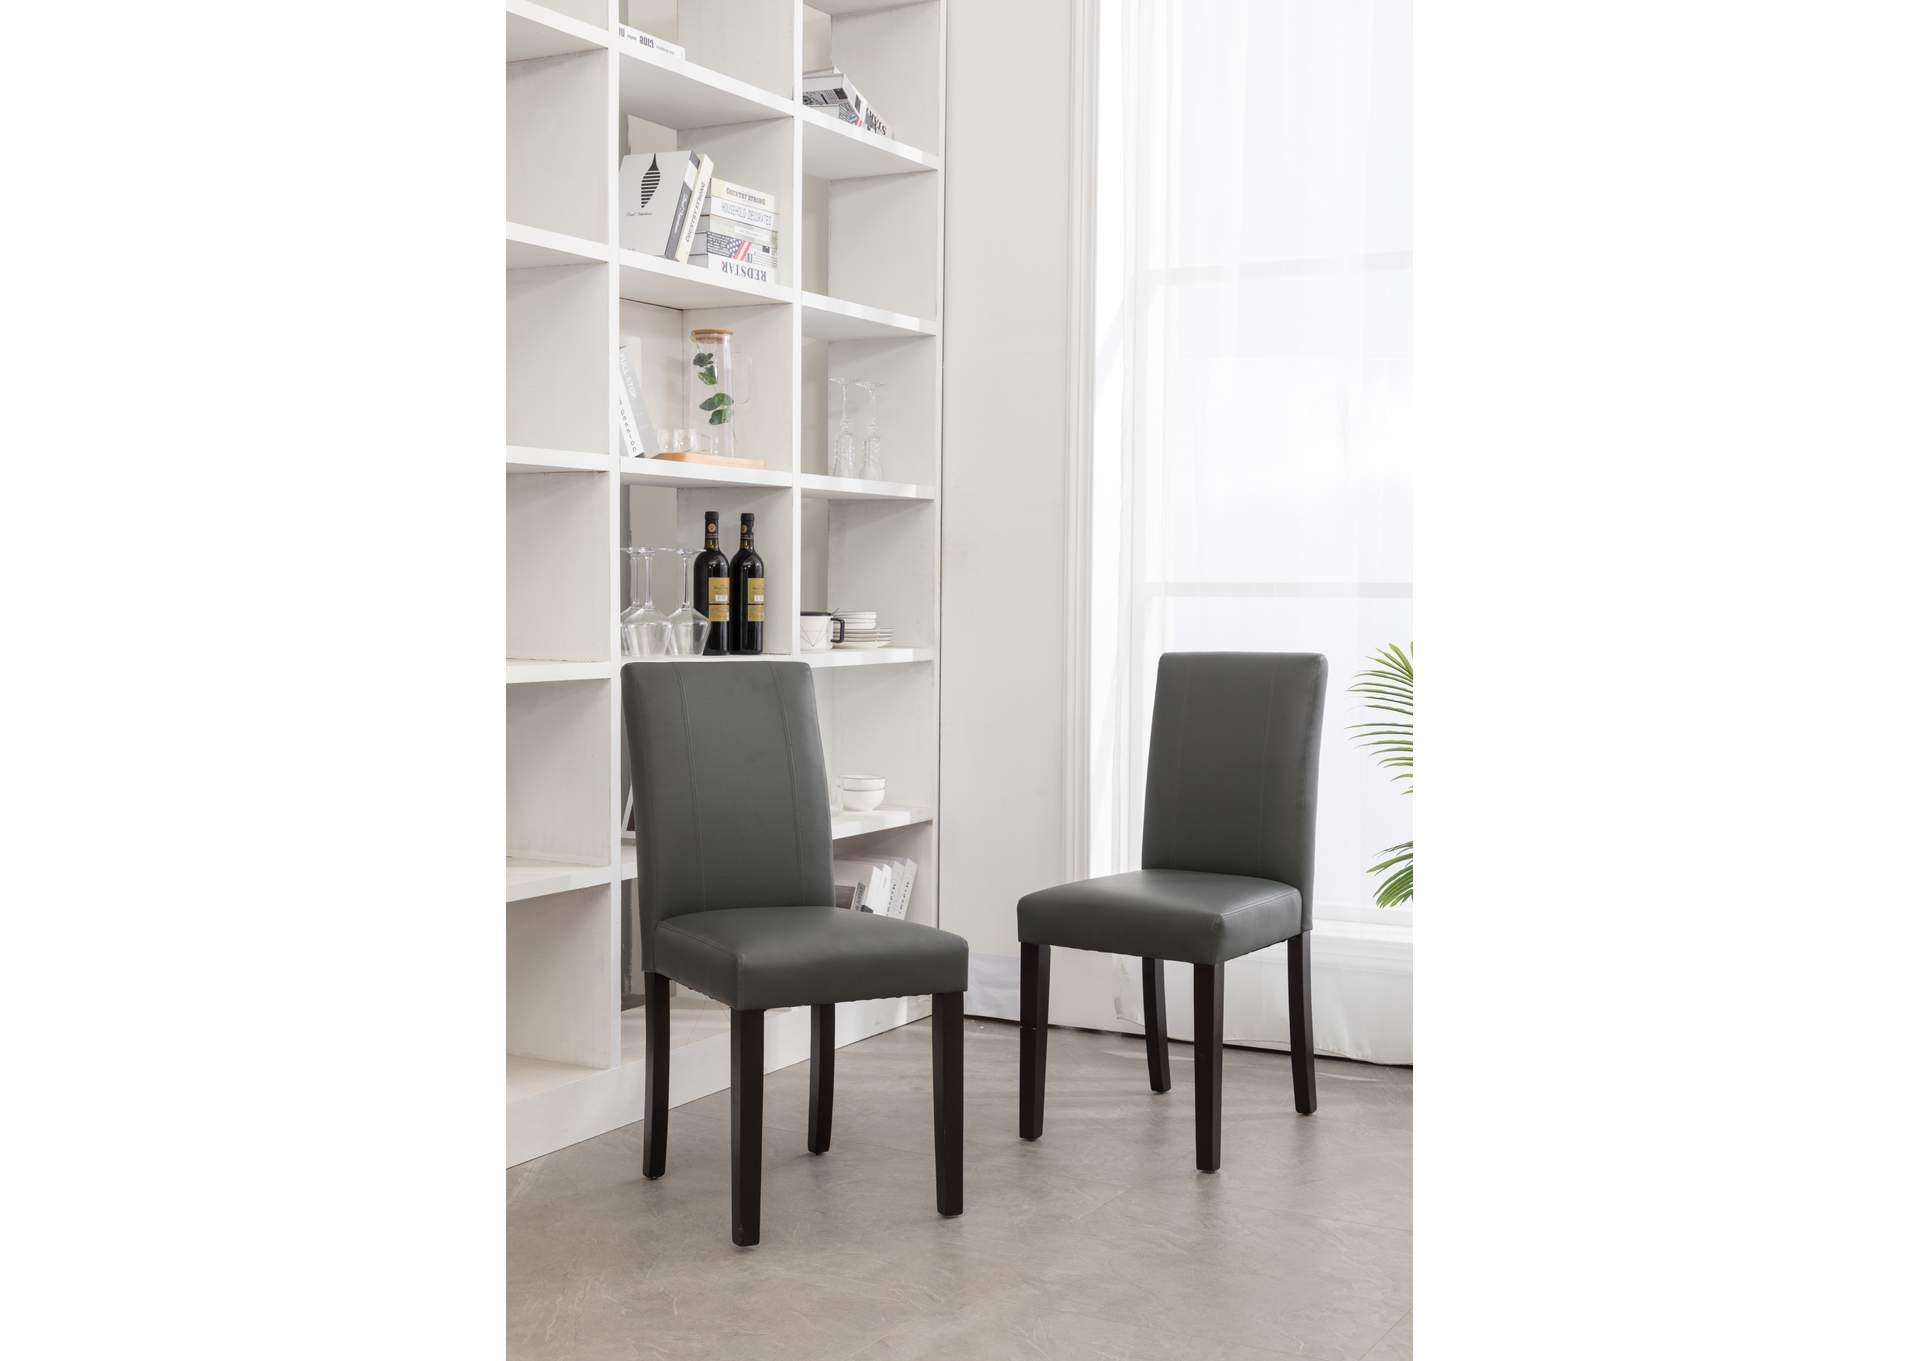 3210 Grey Parson Chair 2 In 1 Box,Global Trading